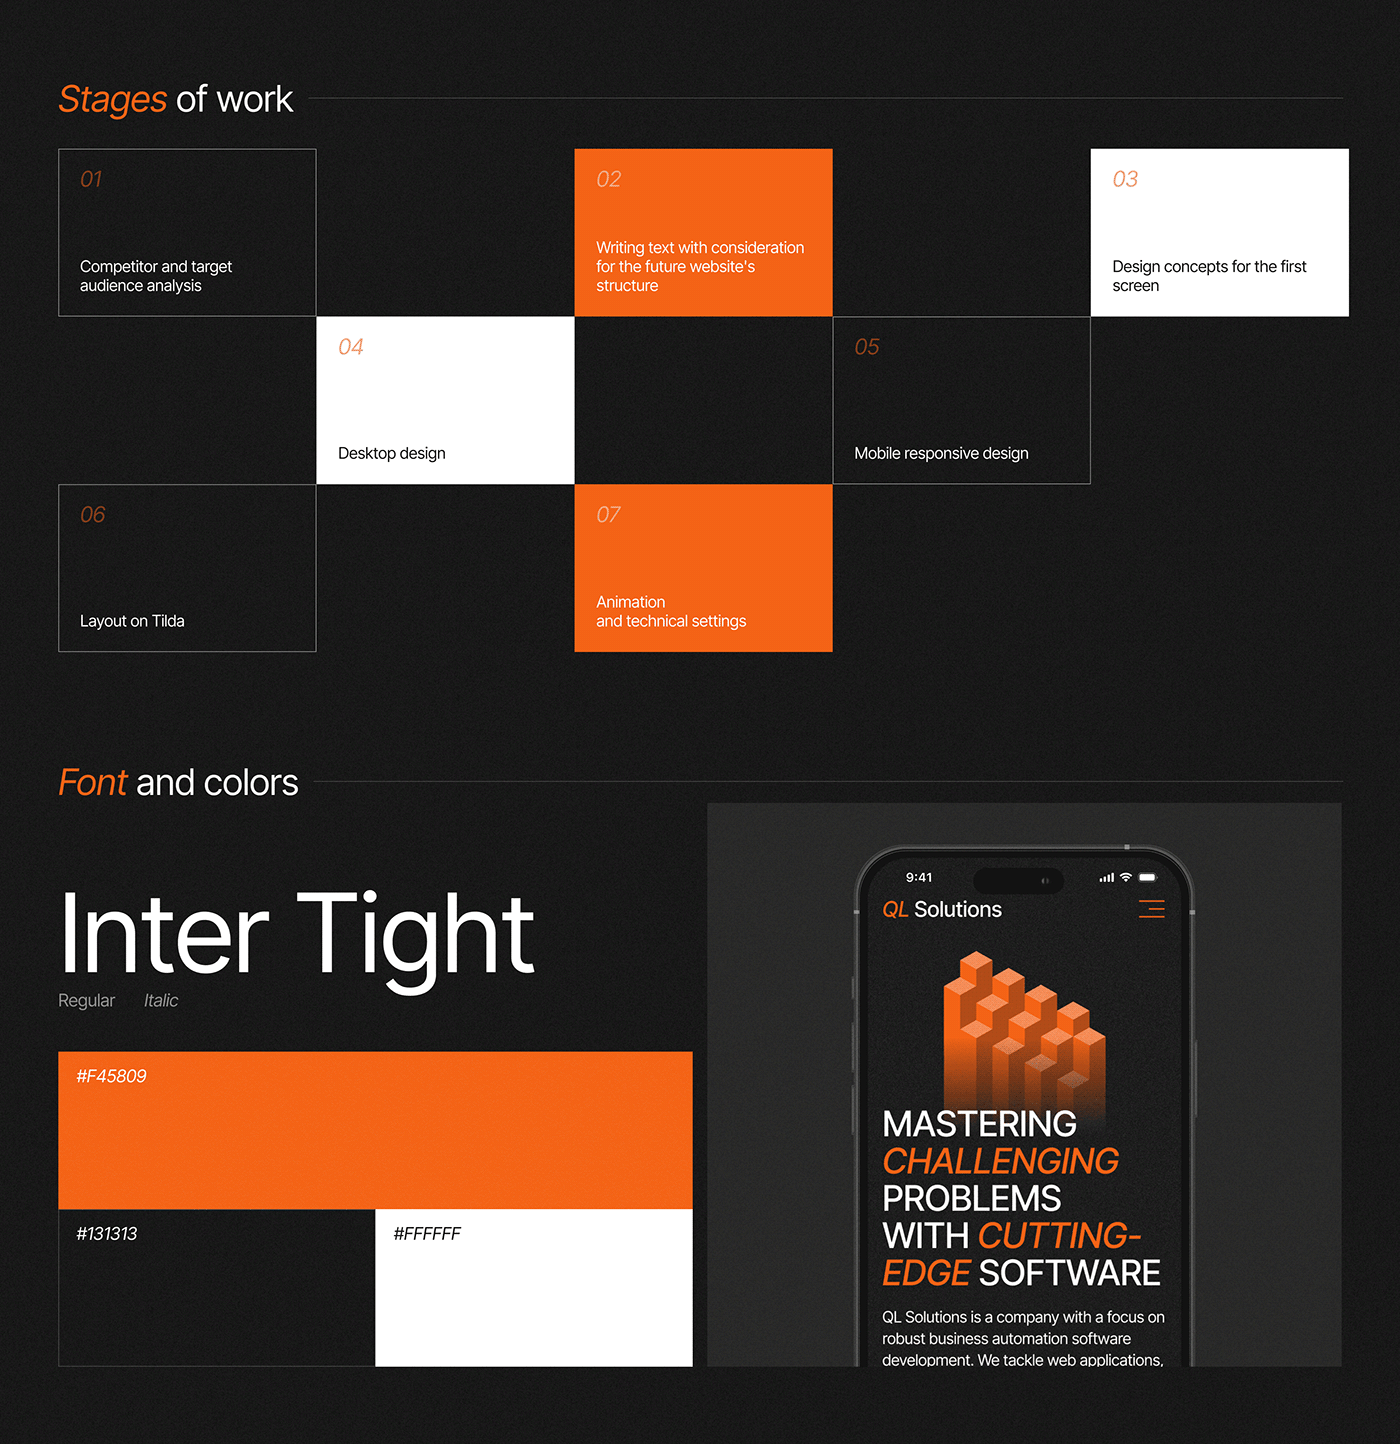 Stages of work and font and colors